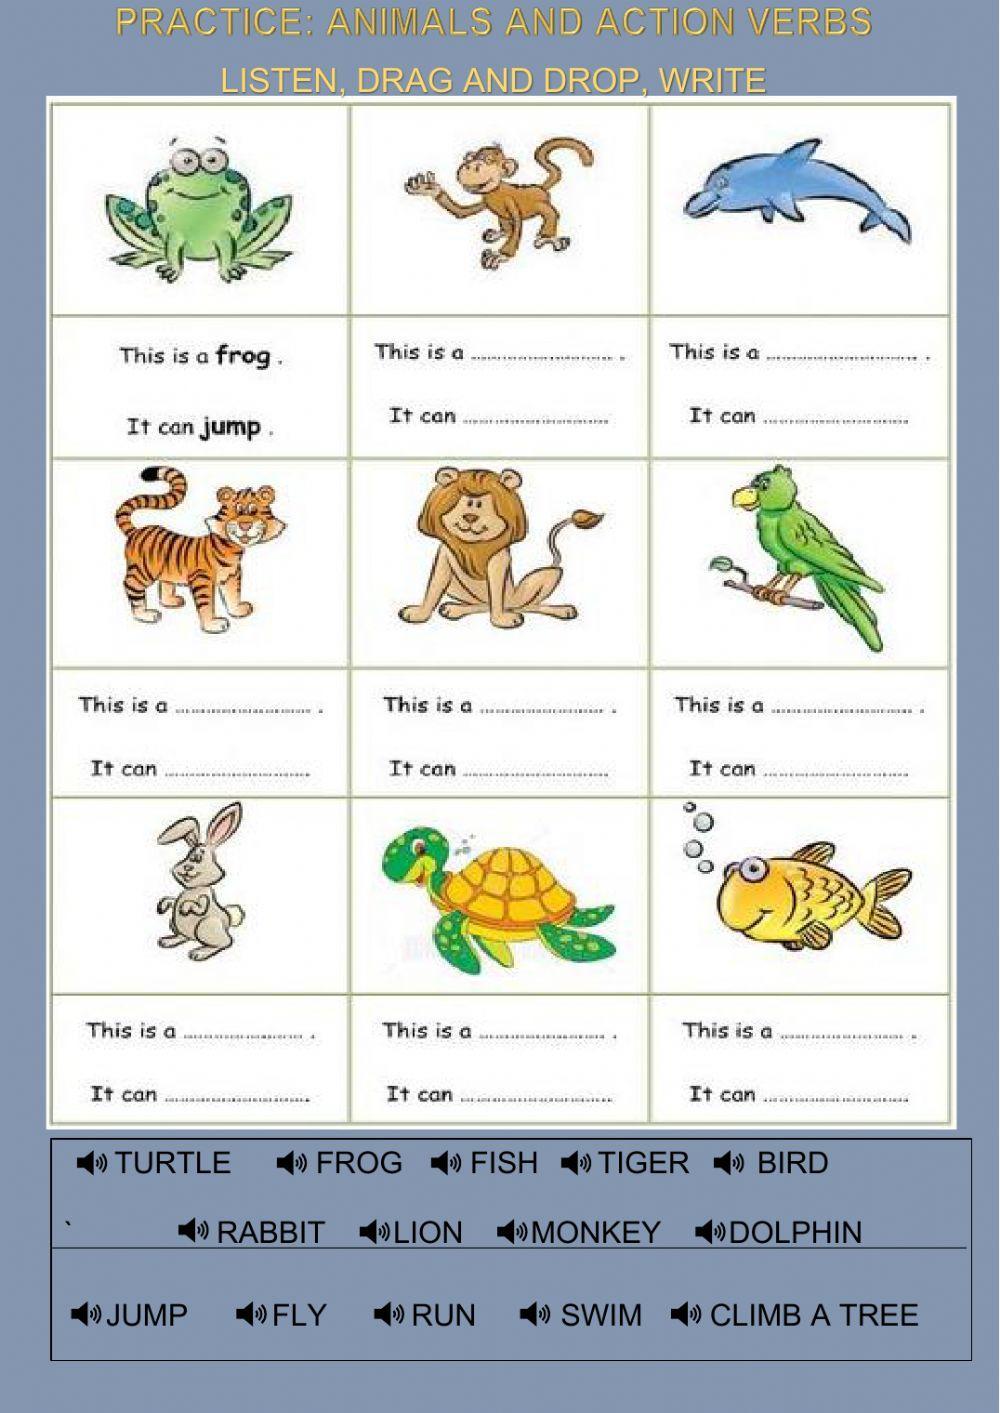 Animals and action verbs